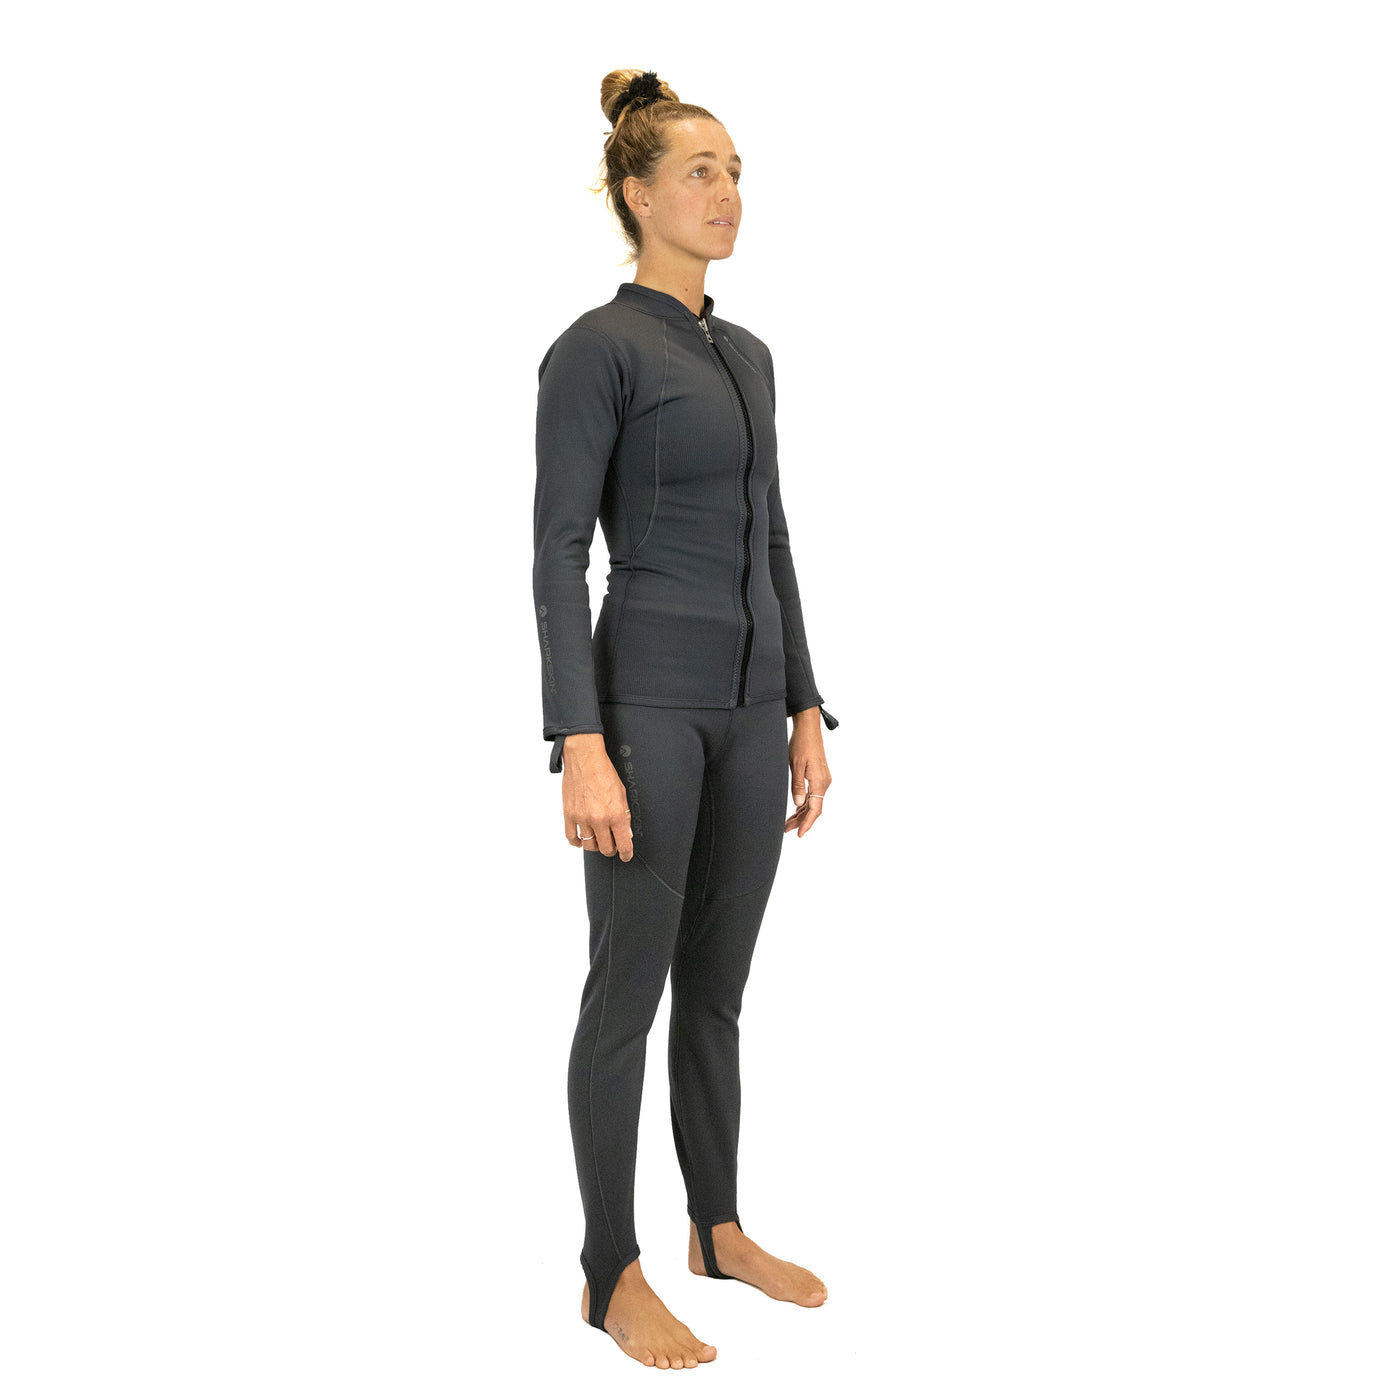 T2 CHILLPROOF TOP AND BOTTOMS PACKAGE - WOMENS